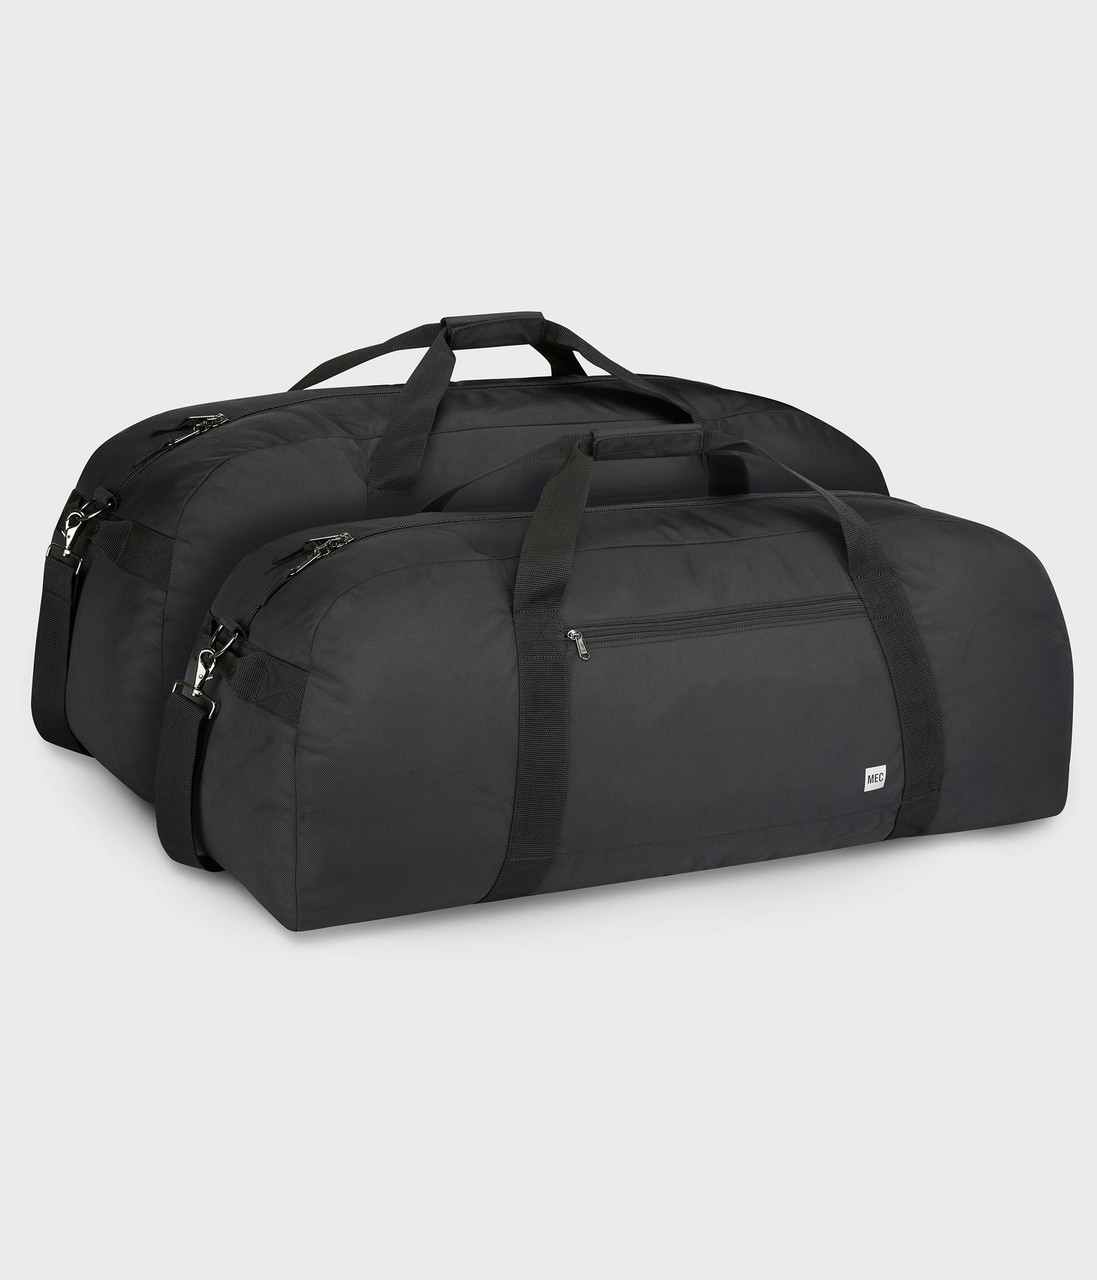 Large Recycled Duffle Bag Black